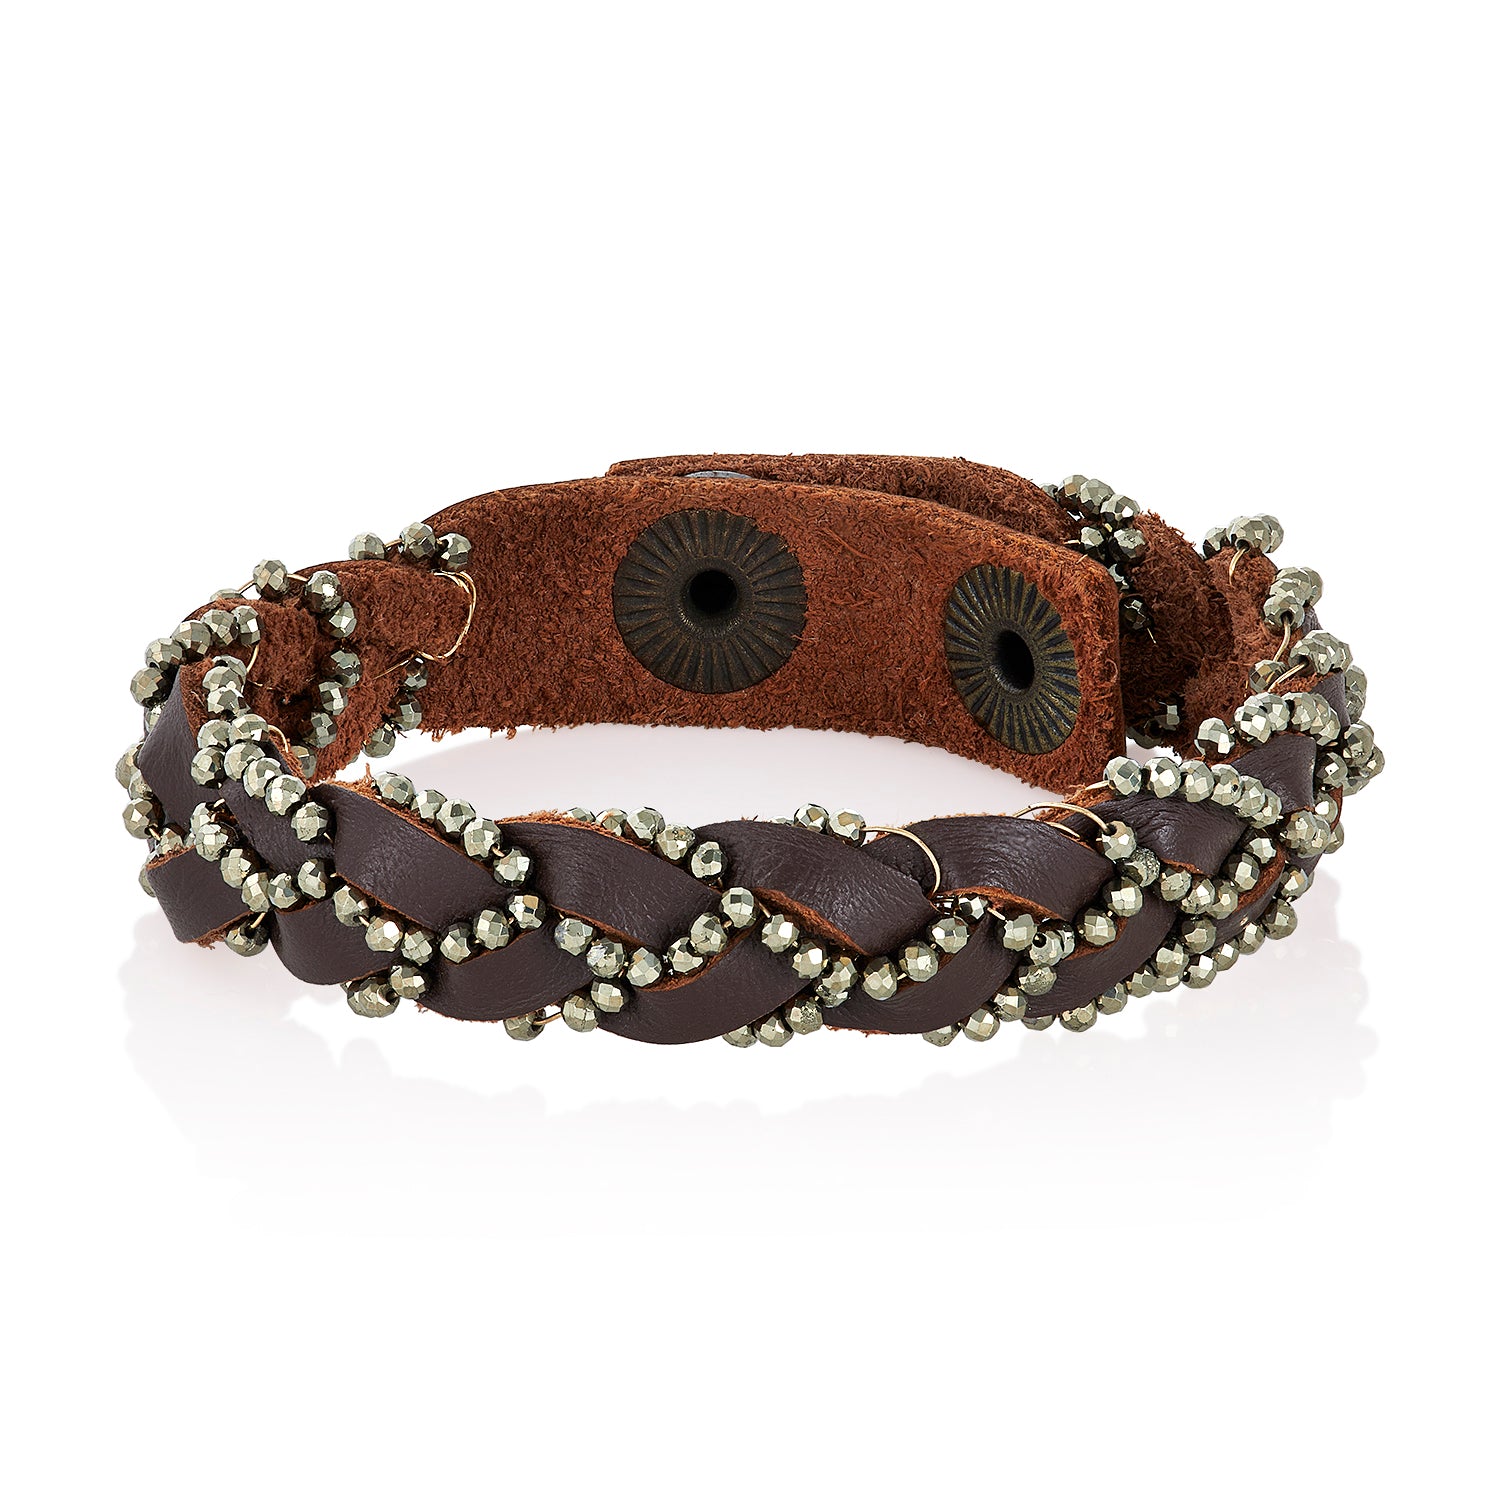 Woven Pyrite Braided Leather Bracelet